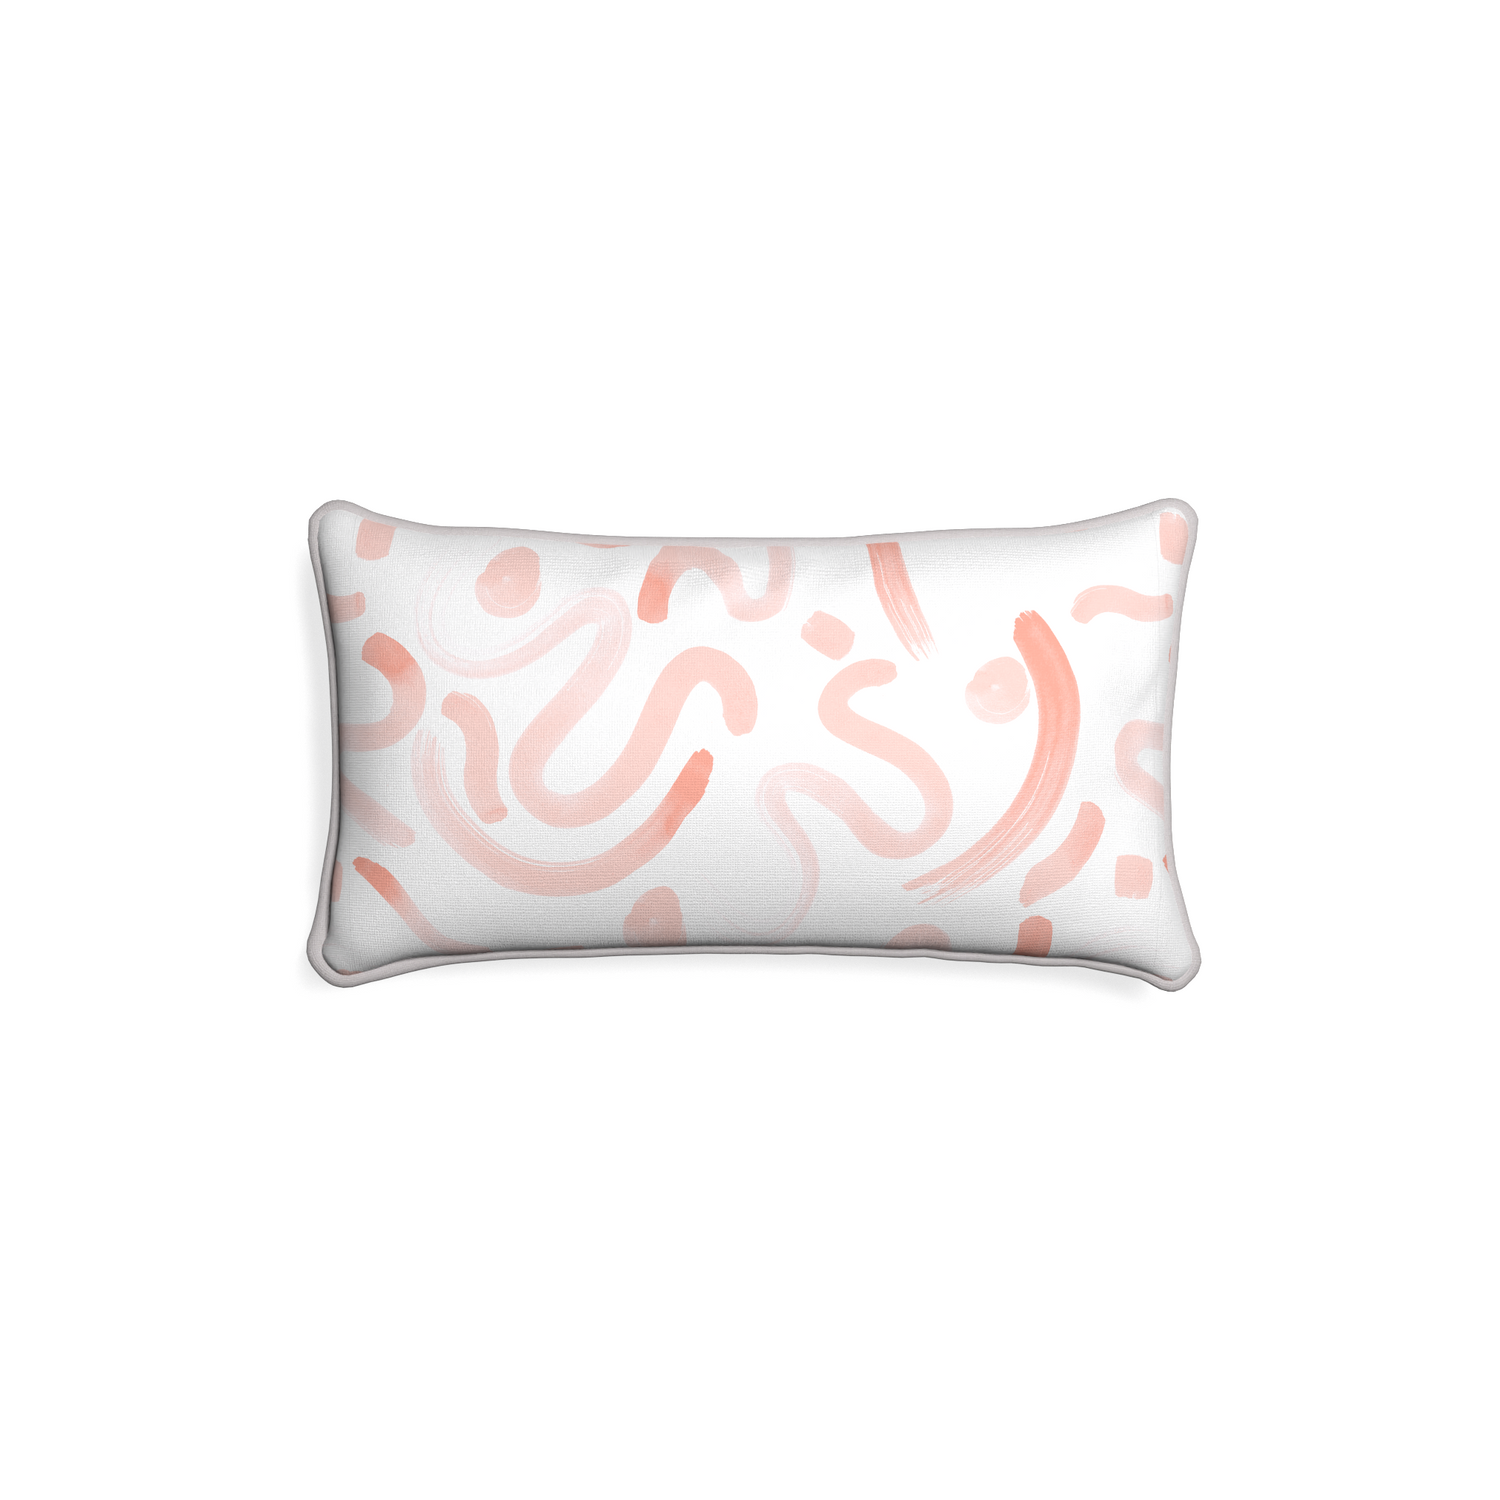 Petite-lumbar hockney pink custom pink graphicpillow with pebble piping on white background